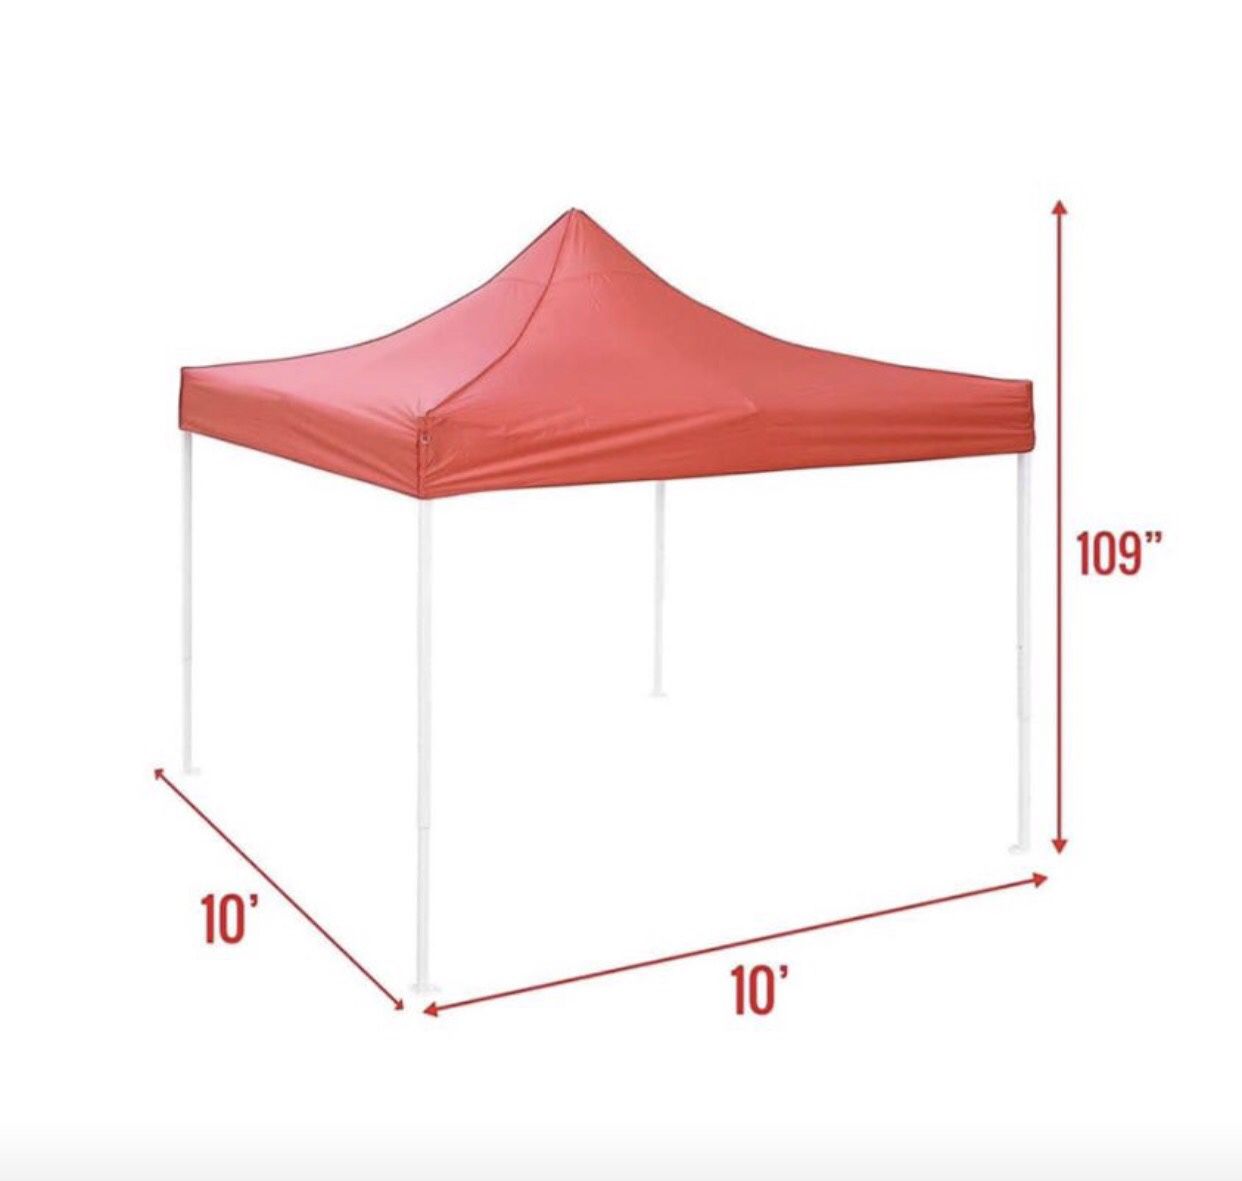 ☀️☀️☀️10x10ft Pop Up Canopy Tent with Storage bag☀️☀️☀️